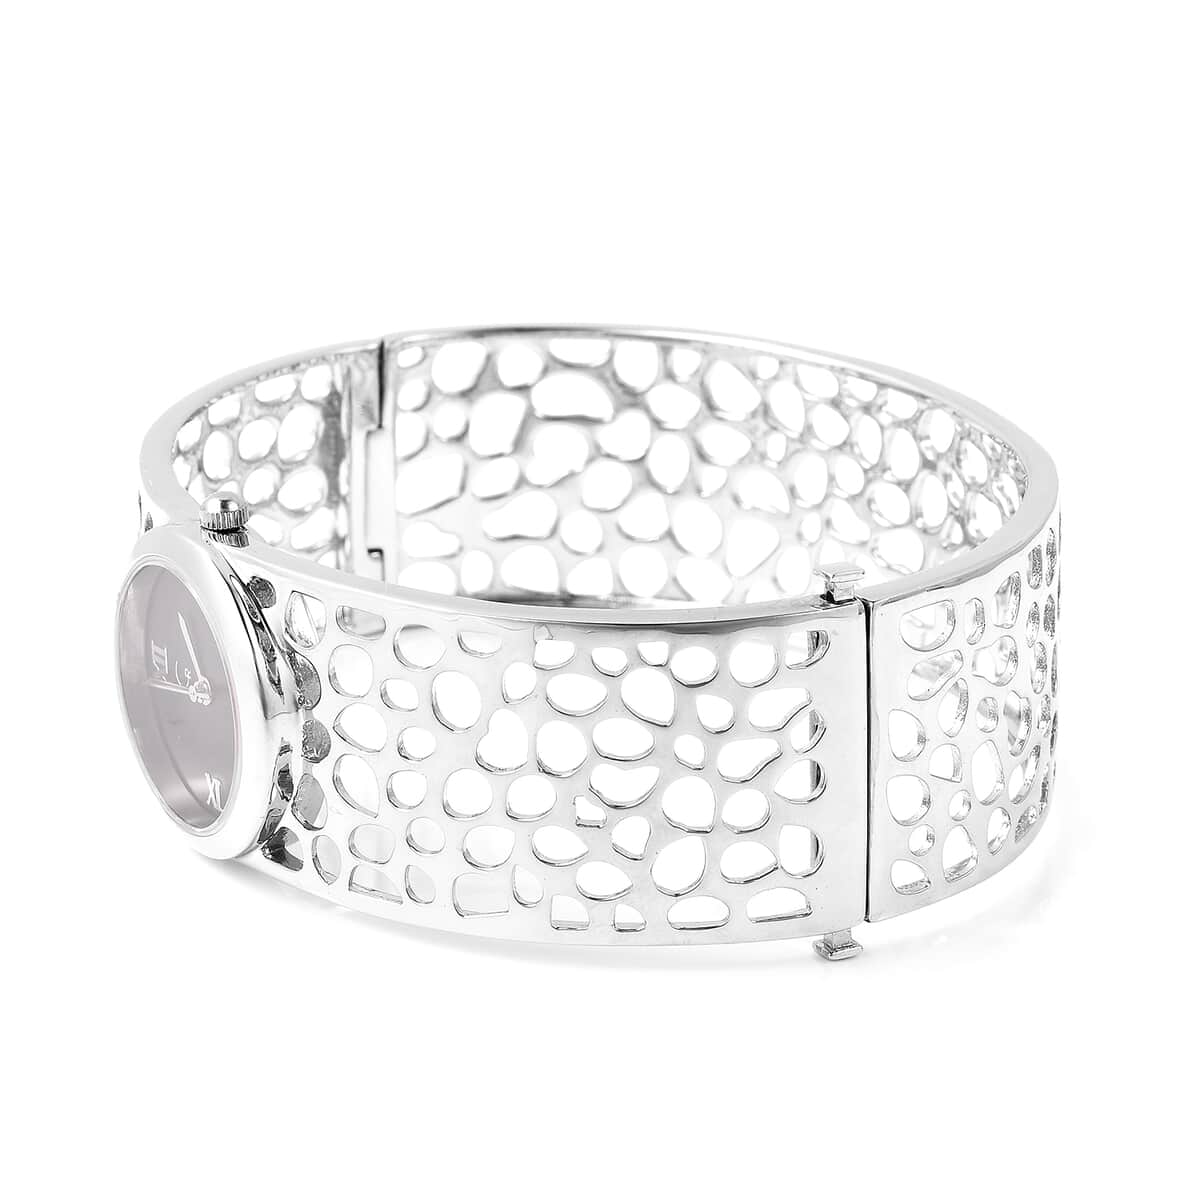 RACHEL GALLEY Swiss Movement Watch Bangle Bracelet in Sterling Silver with Stainless Steel Back (7.5 in) 52.10 Grams image number 4